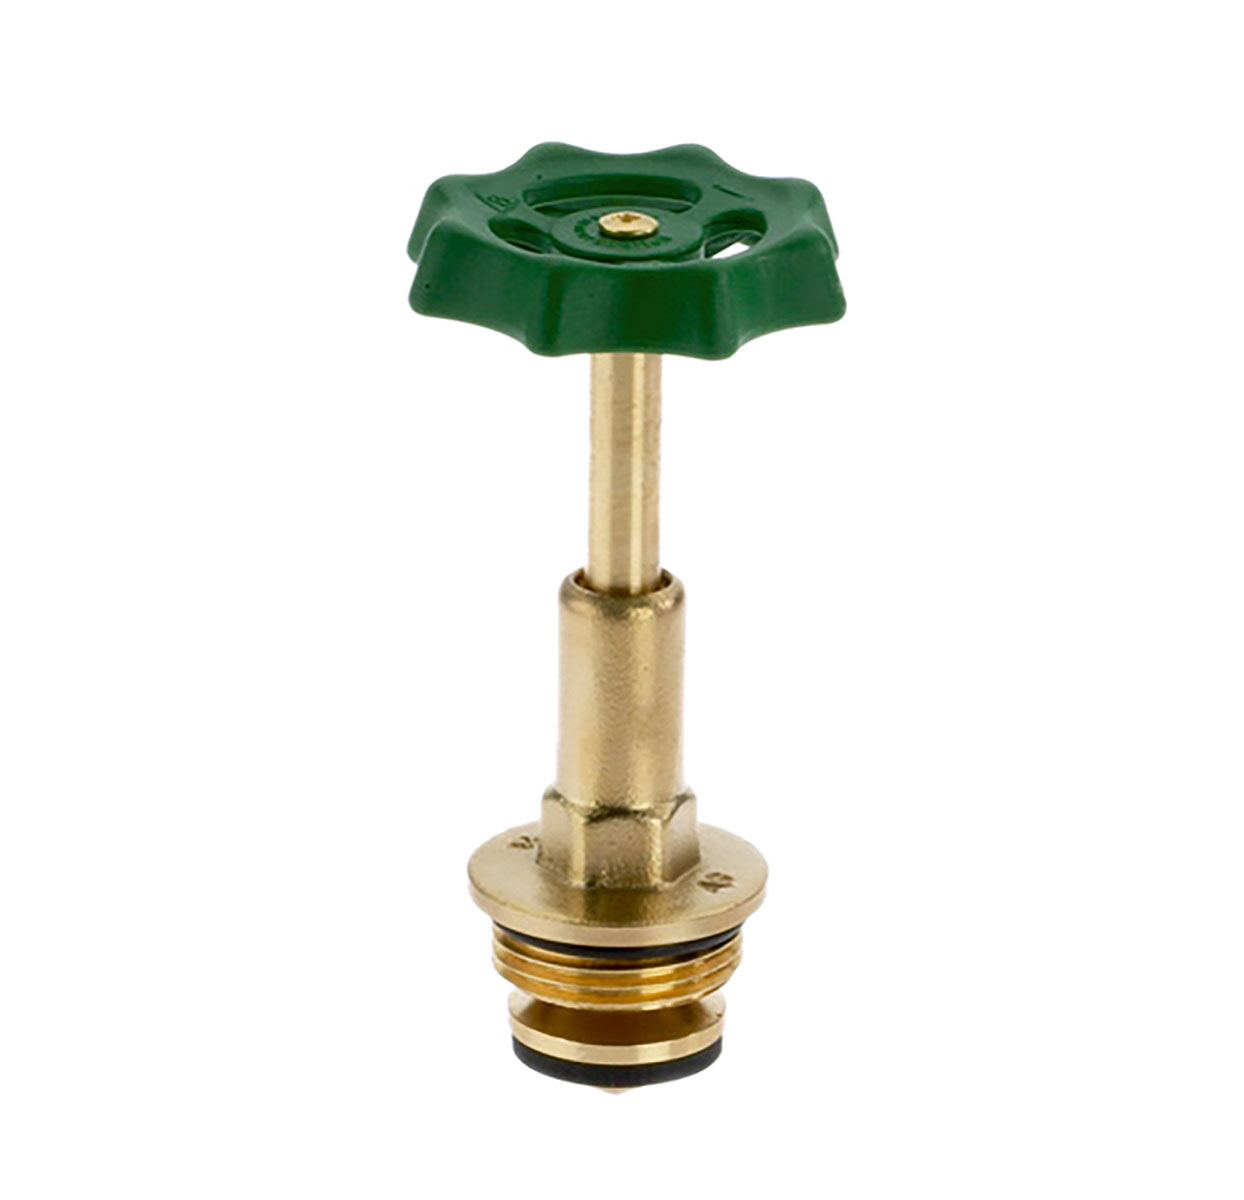 1212500 - Brass Upper-part with grease chamber for free-flow valves, rising spindle